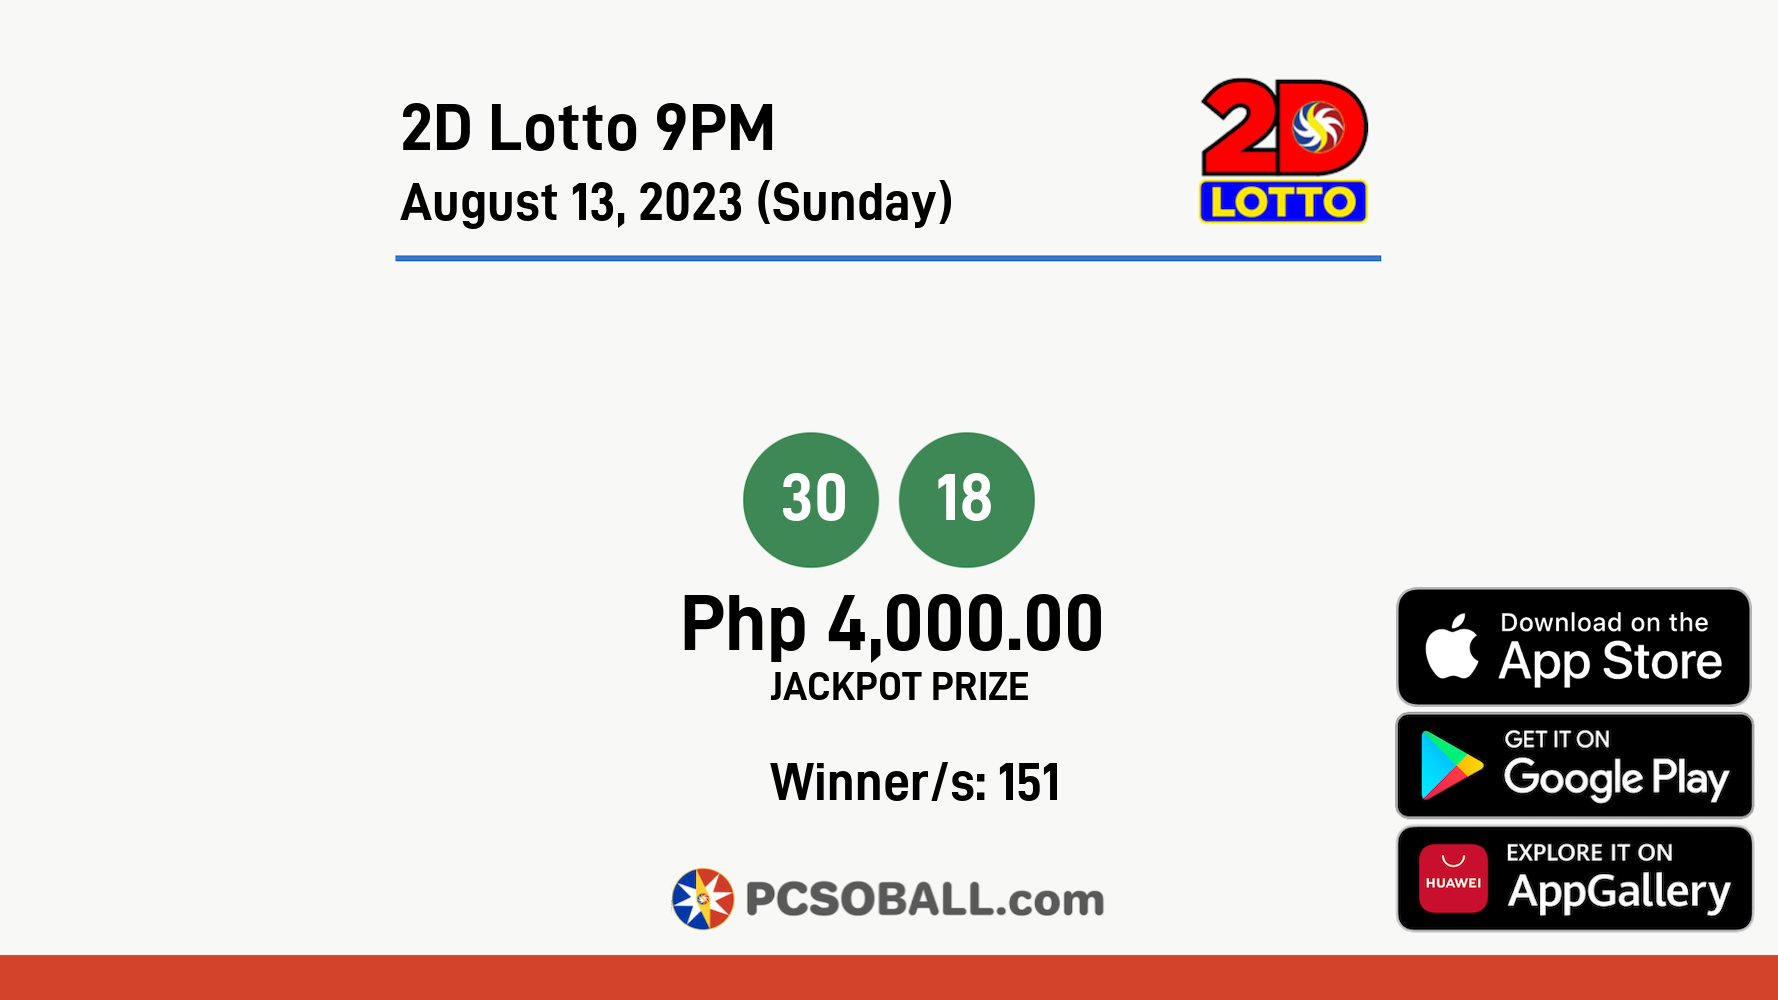 2D Lotto 9PM August 13, 2023 (Sunday) Result